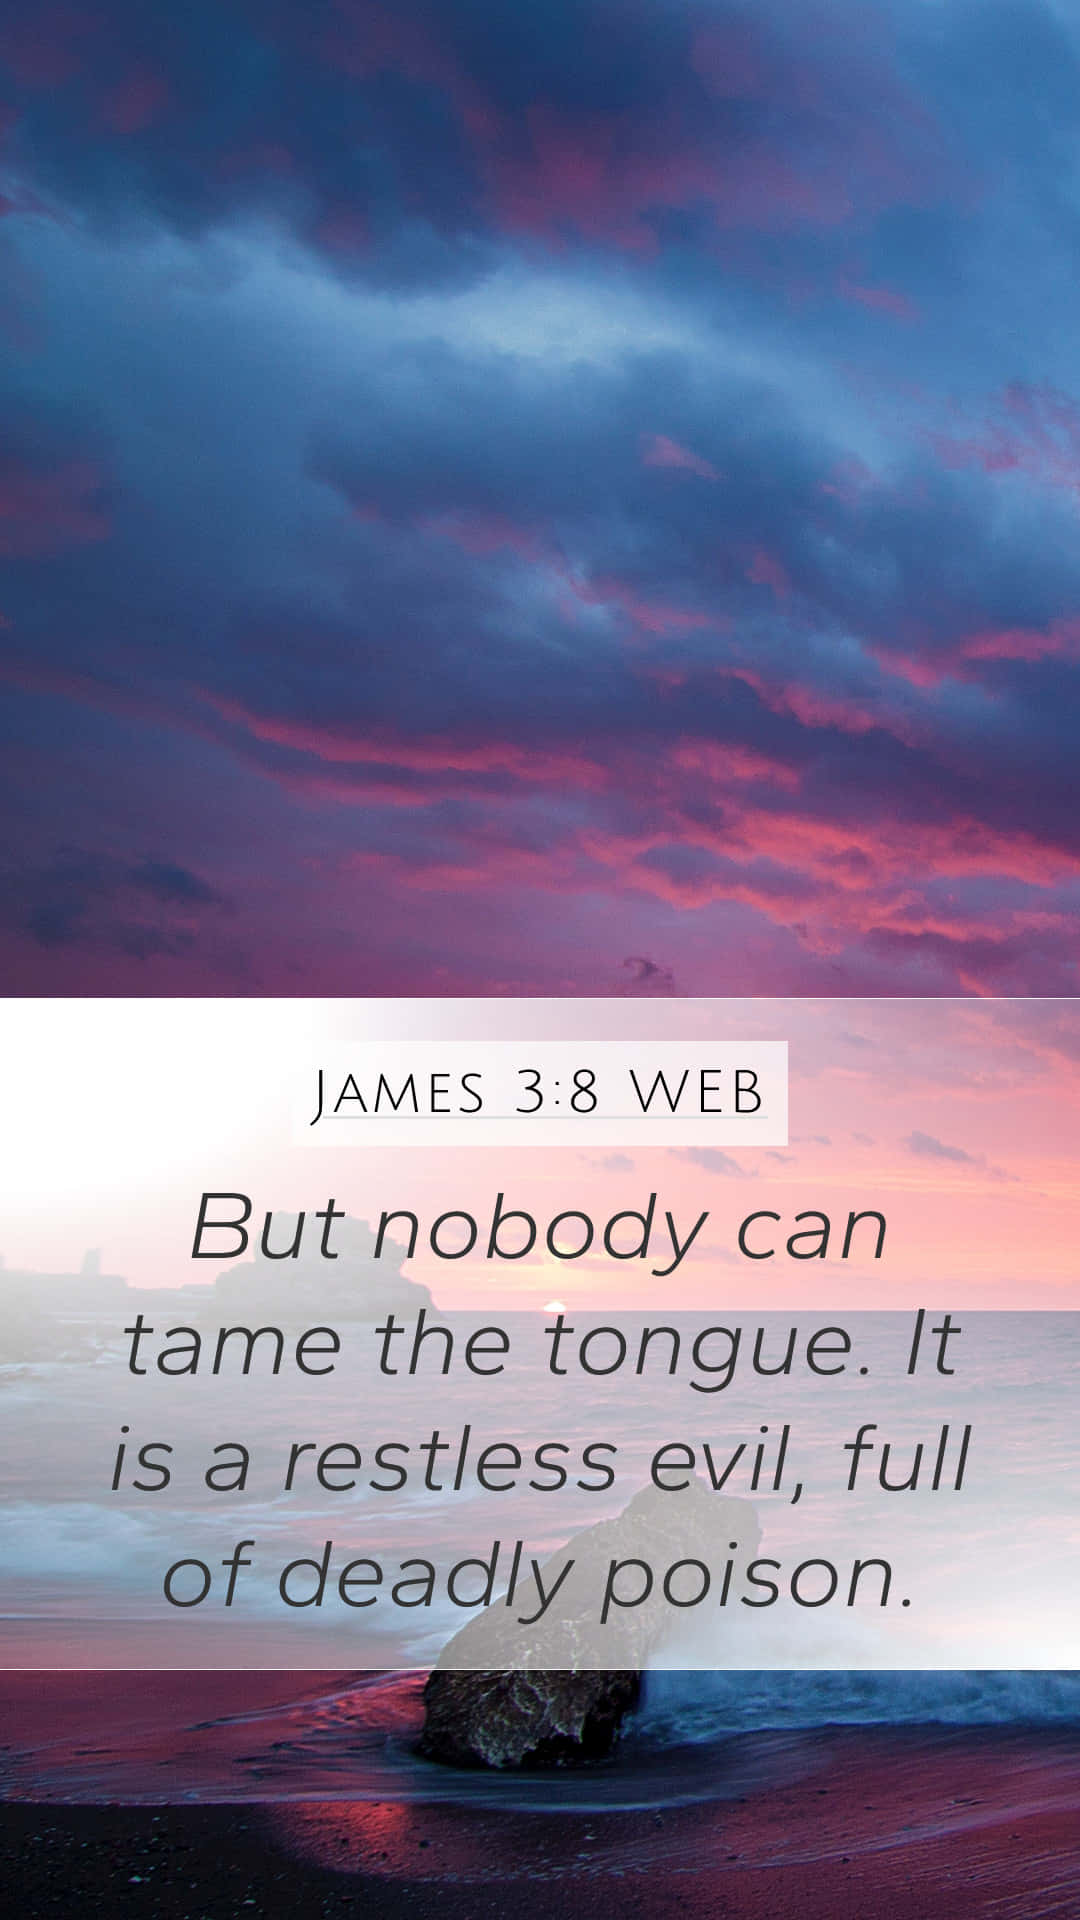 Book Of James Verse About The Restless Tongue Wallpaper